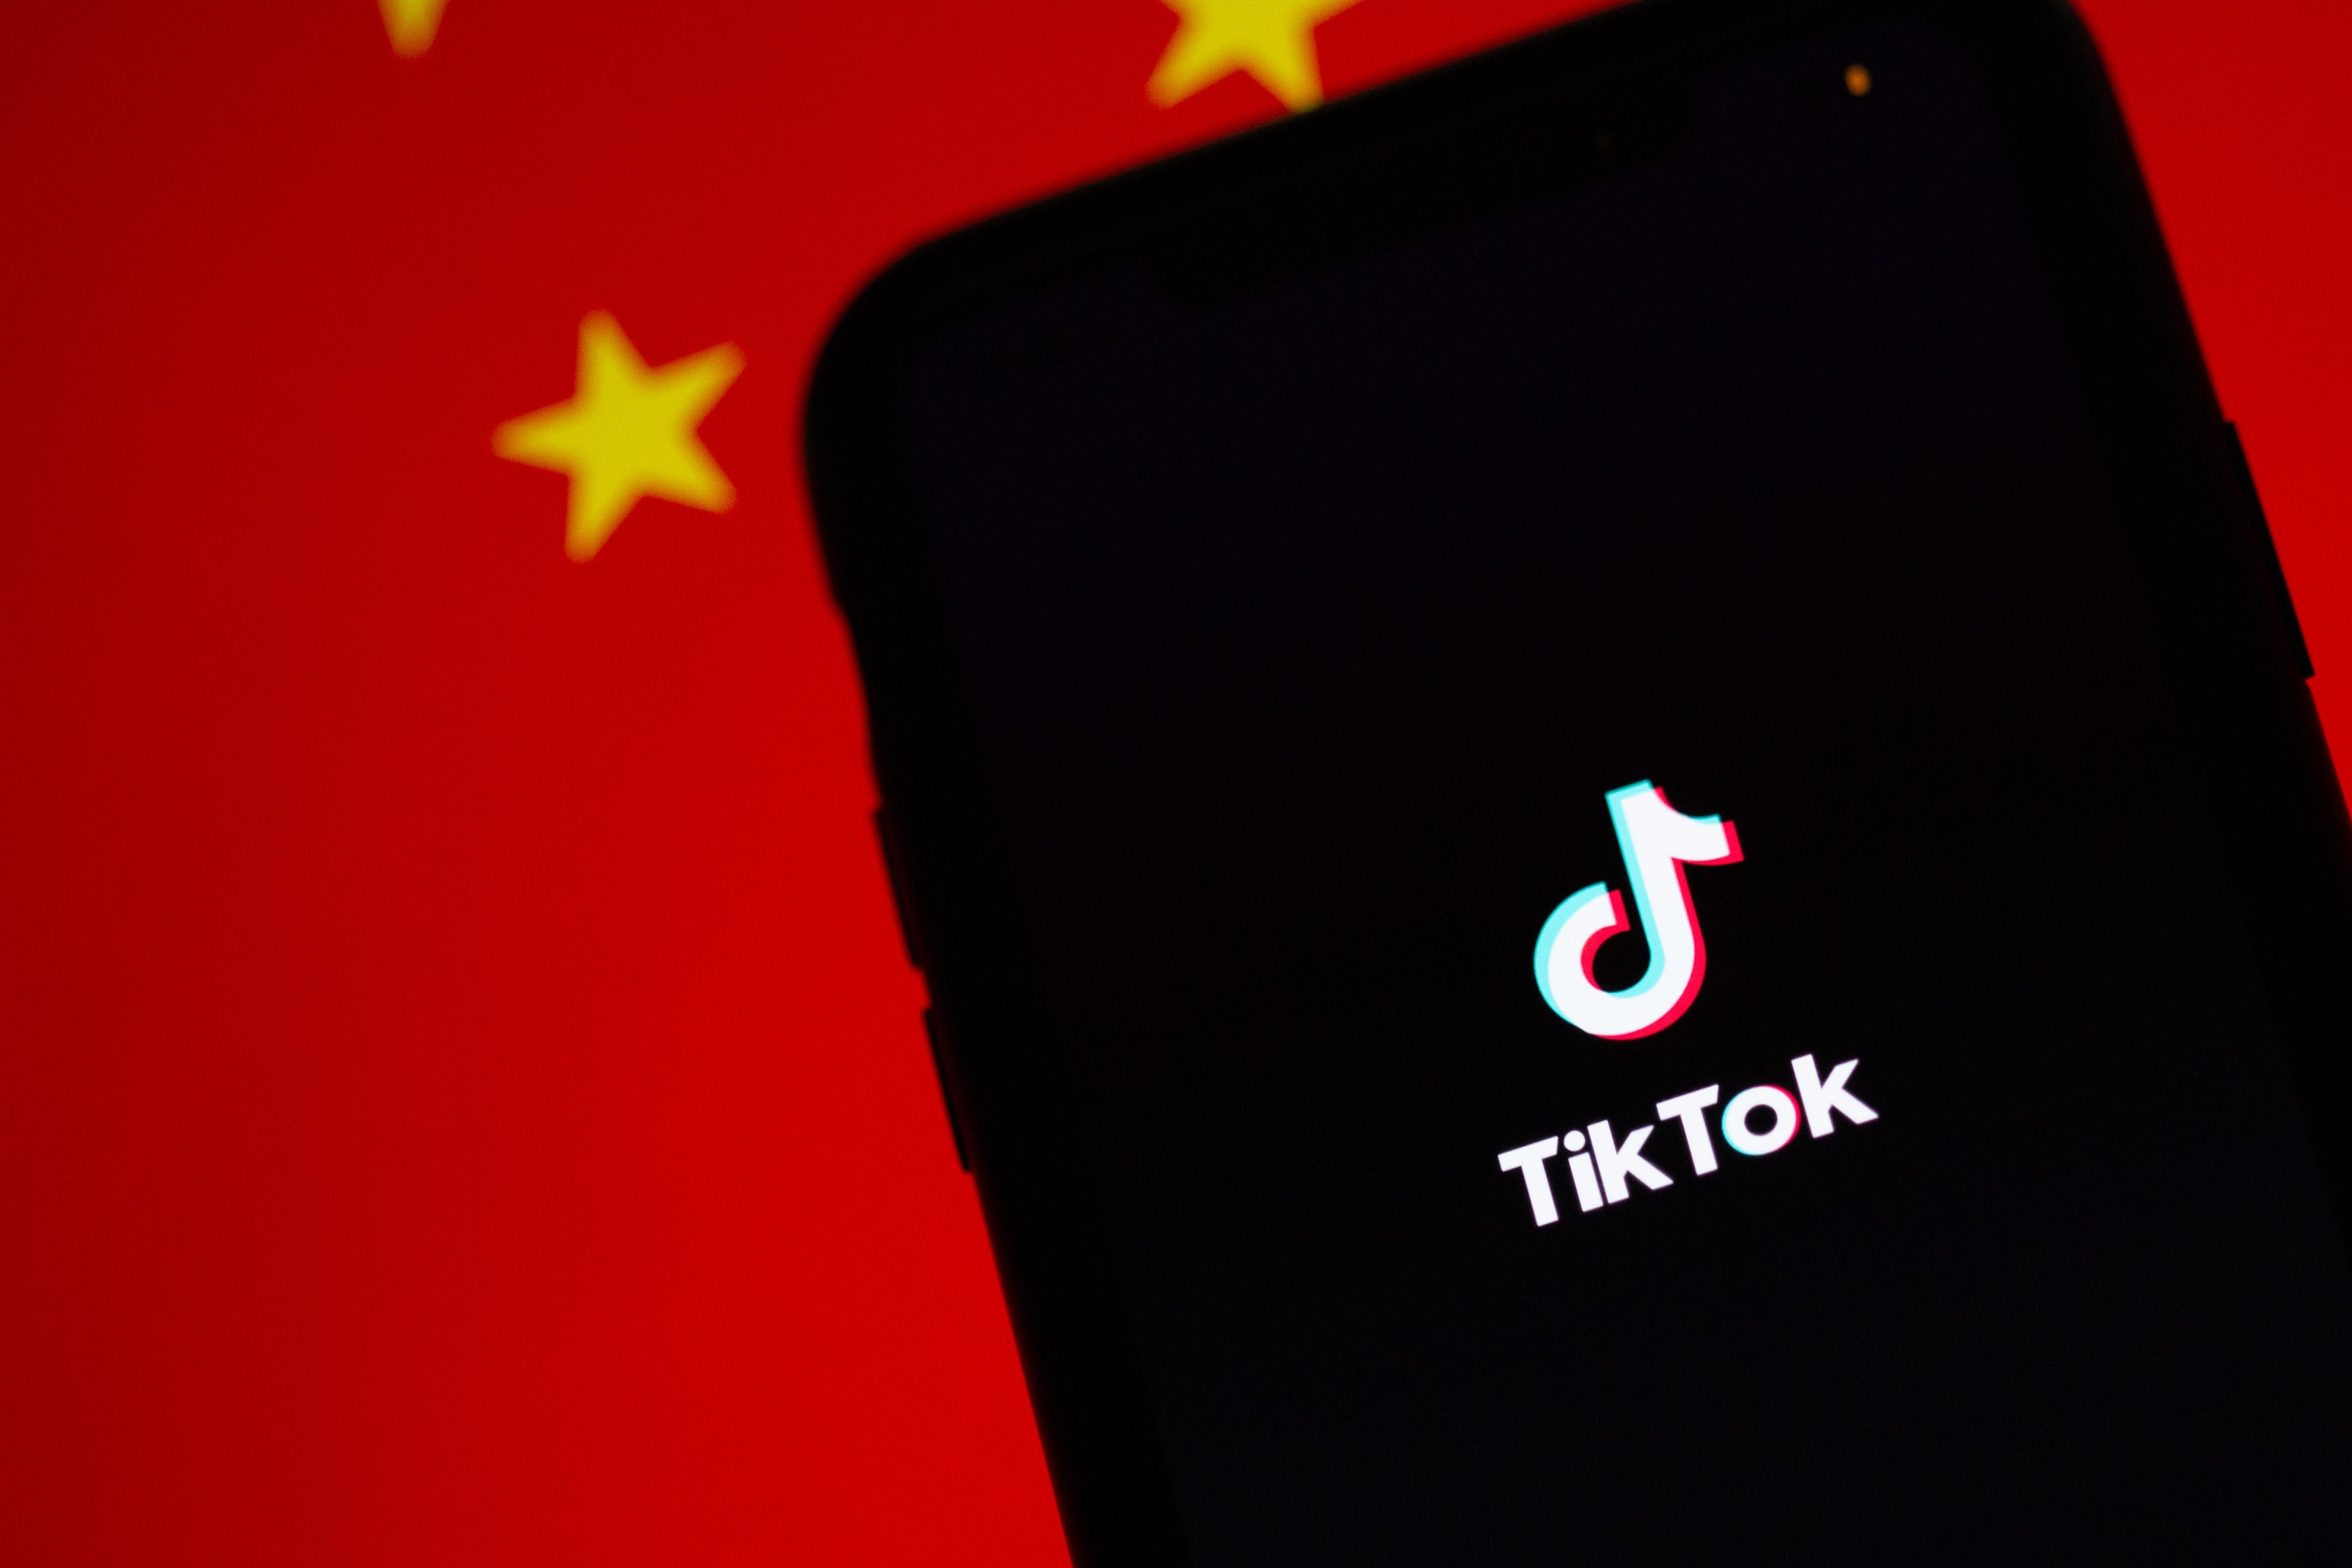 TikTok exec comments on Trump’s ban saying “TikTok is here for the long run”